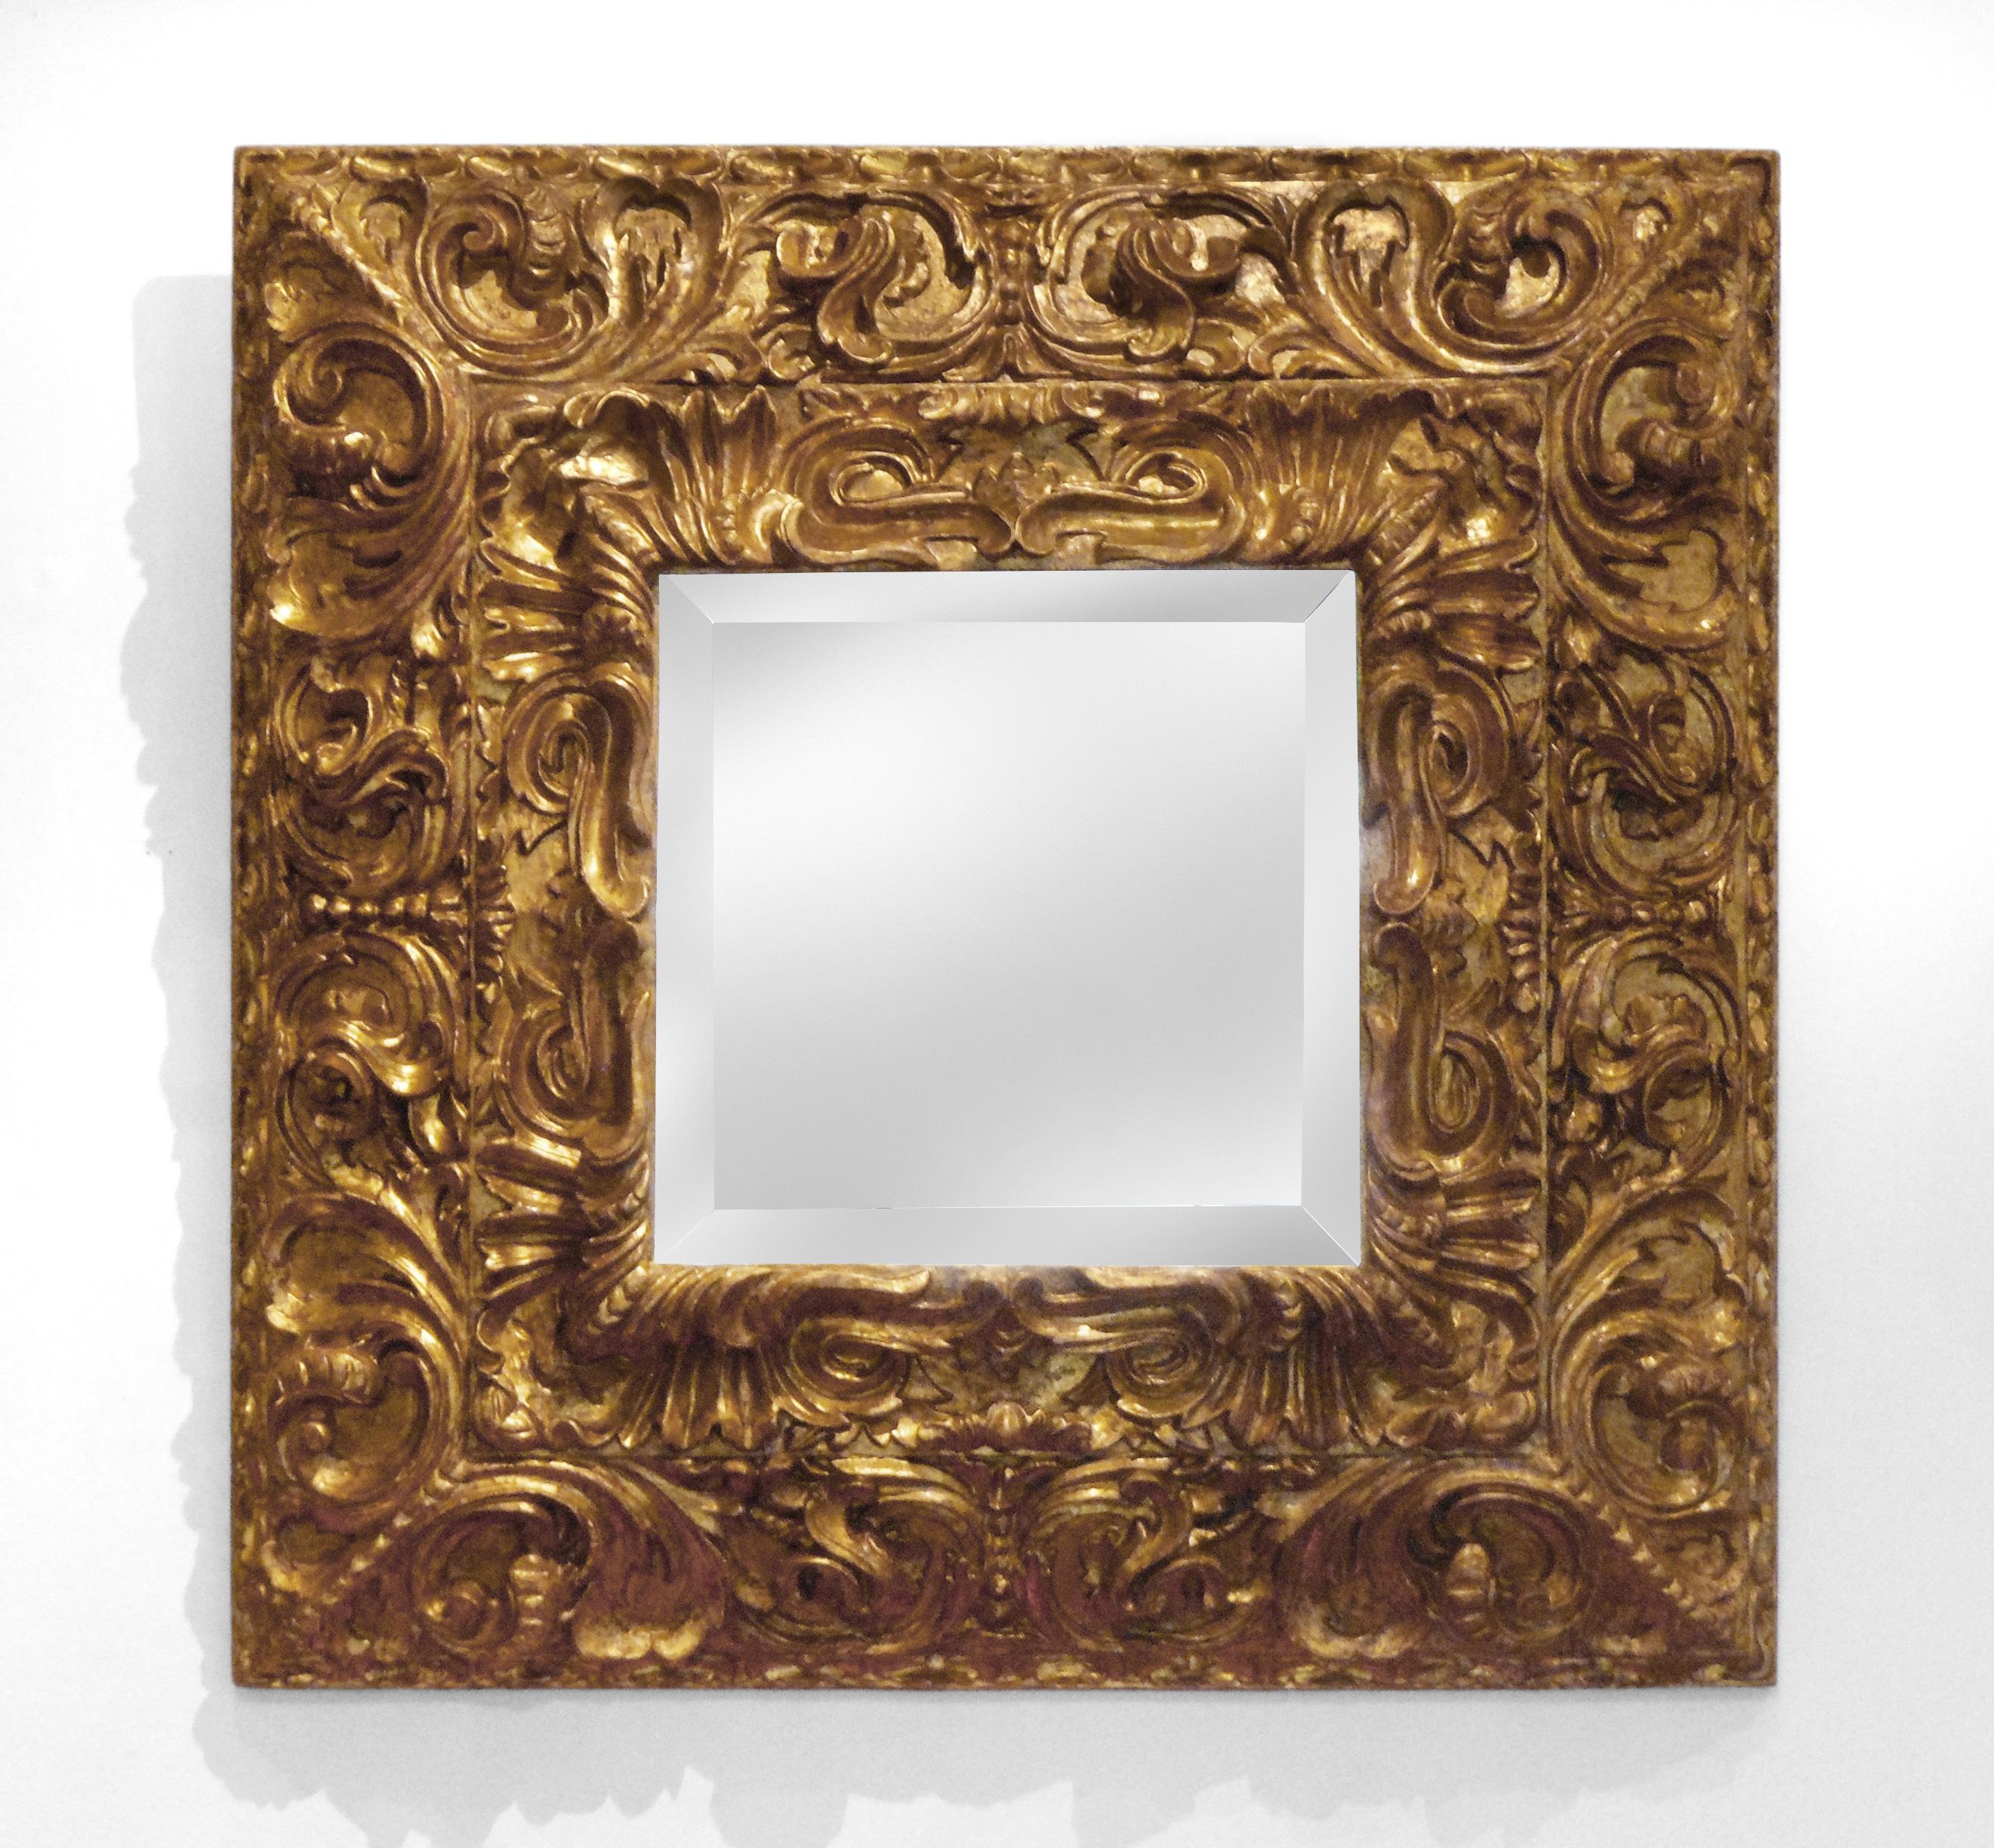 Pair of magnificent Spanish Baroque giltwood mirrors
Early 18th century
These extraordinary carved mirror frames virtually define the Baroque esthetic; exhibiting a mastery of energetic movement and animated vision. Each with a later beveled